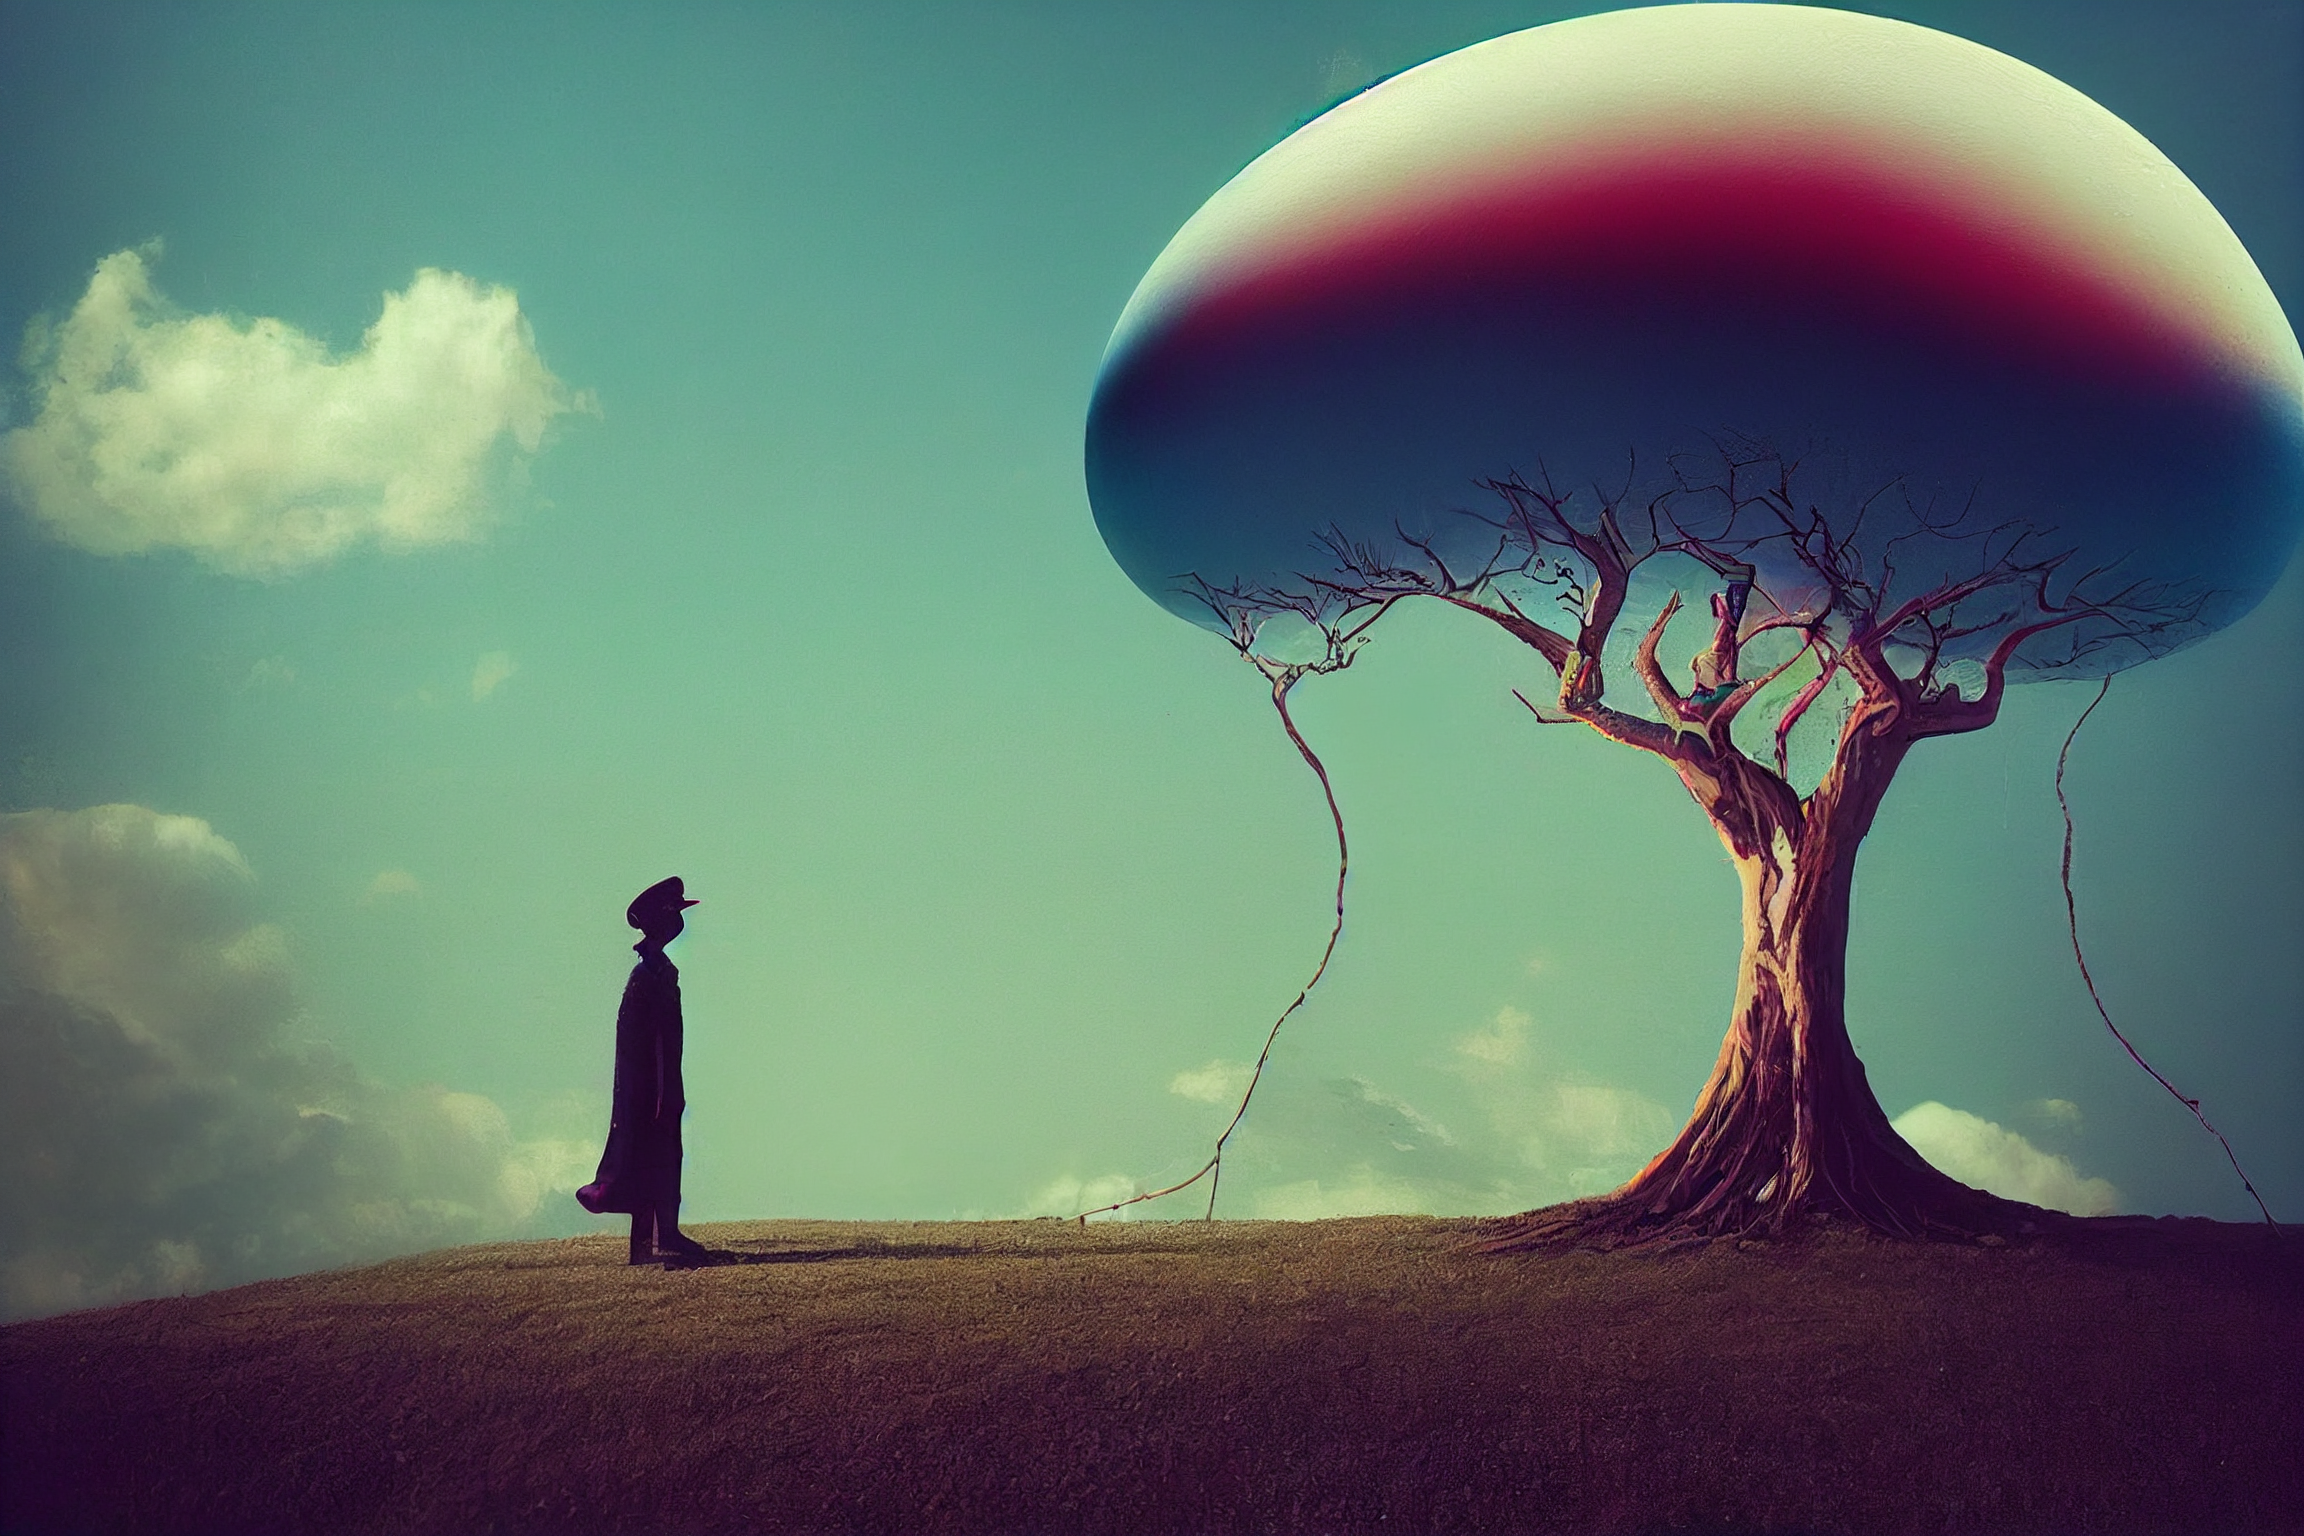 I’ll keep my head up high through the downs and lows – Surreal tree and a blob